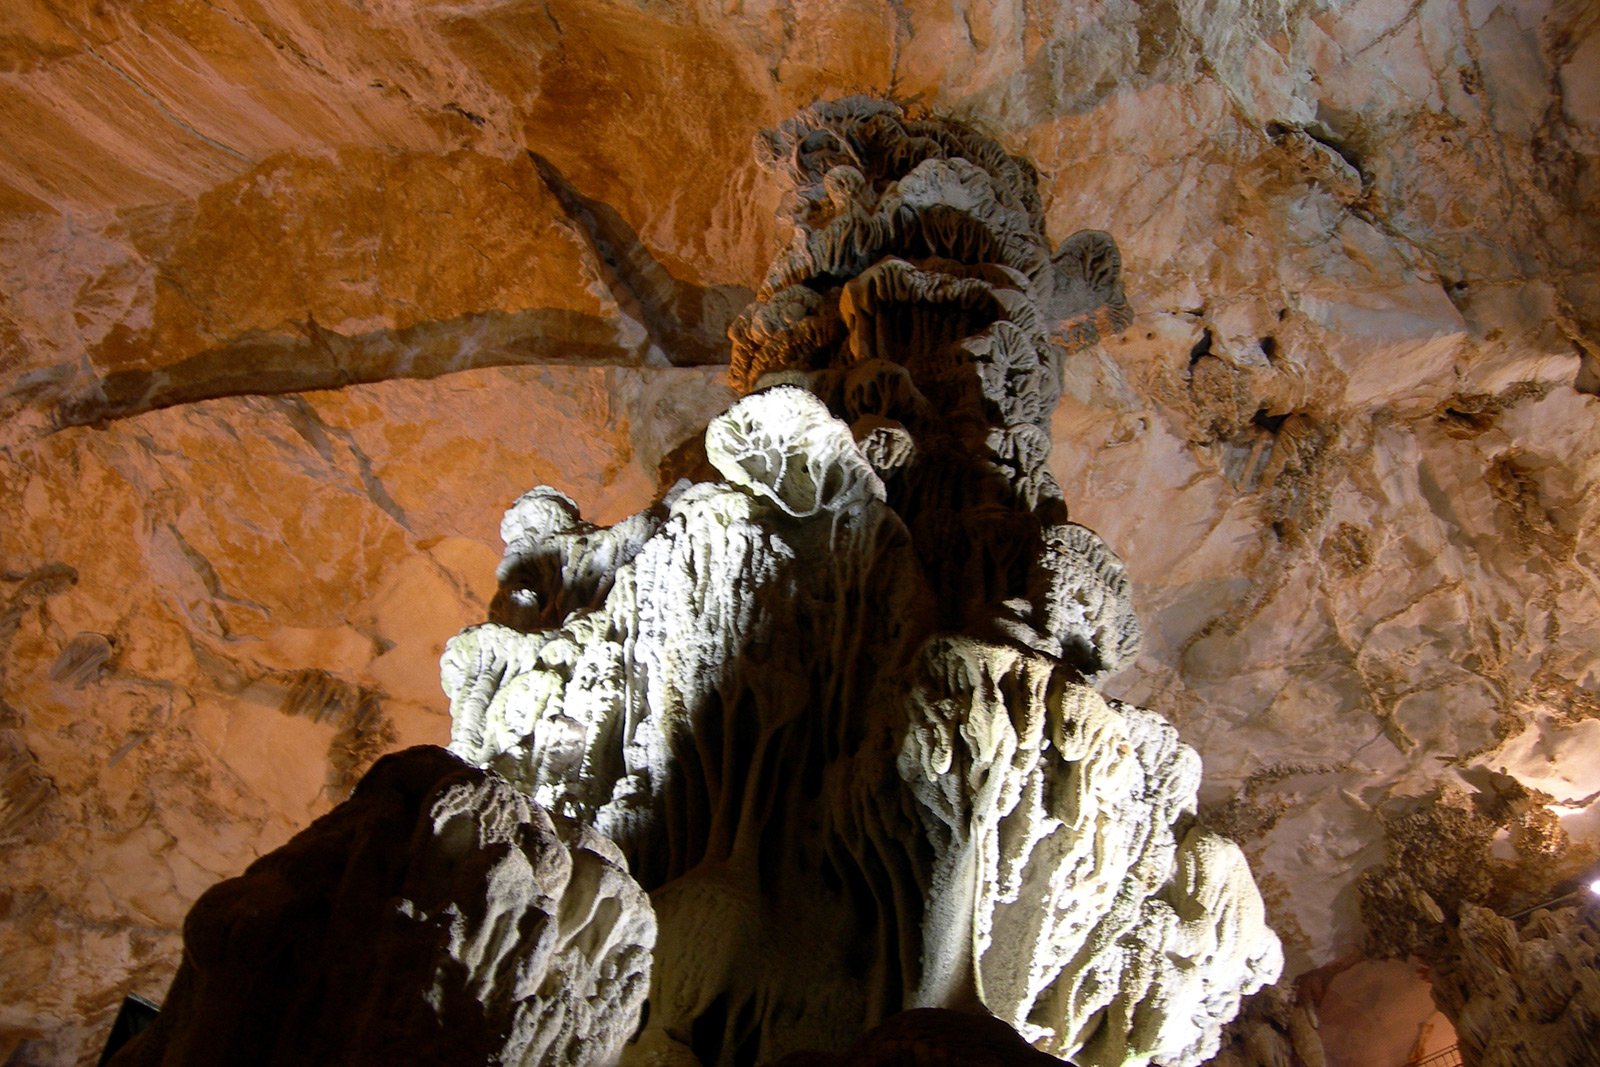 How to see the world's highest stalagnate on Sardinia